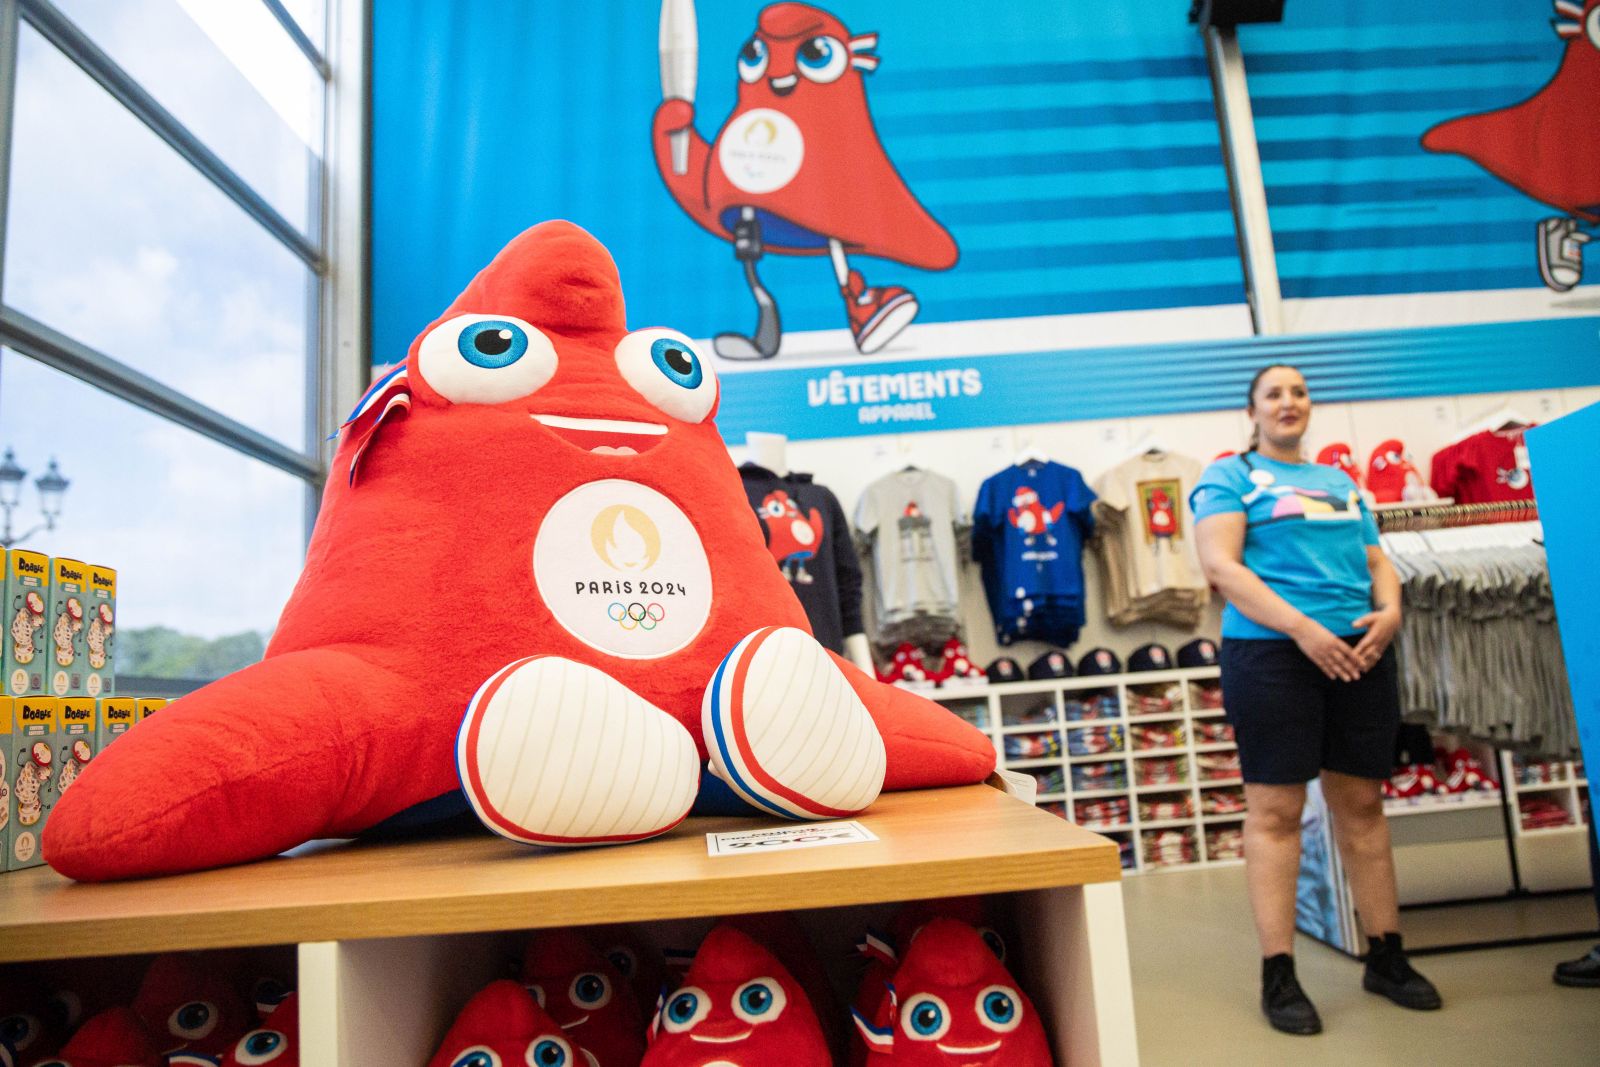 epa11441230 Stuffed toys depicting the Phryges, the official mascot of the Paris 2024 Games, on display at the Paris 2024 official store on the Champs-Elysees on its opening day in Paris, France, 27 June 2024. The Paris 2024 store on Champs-Elysees, the largest of the official Olympic stores, will be open from 27 June until 15 September 2024.  EPA/CHRISTOPHE PETIT TESSON